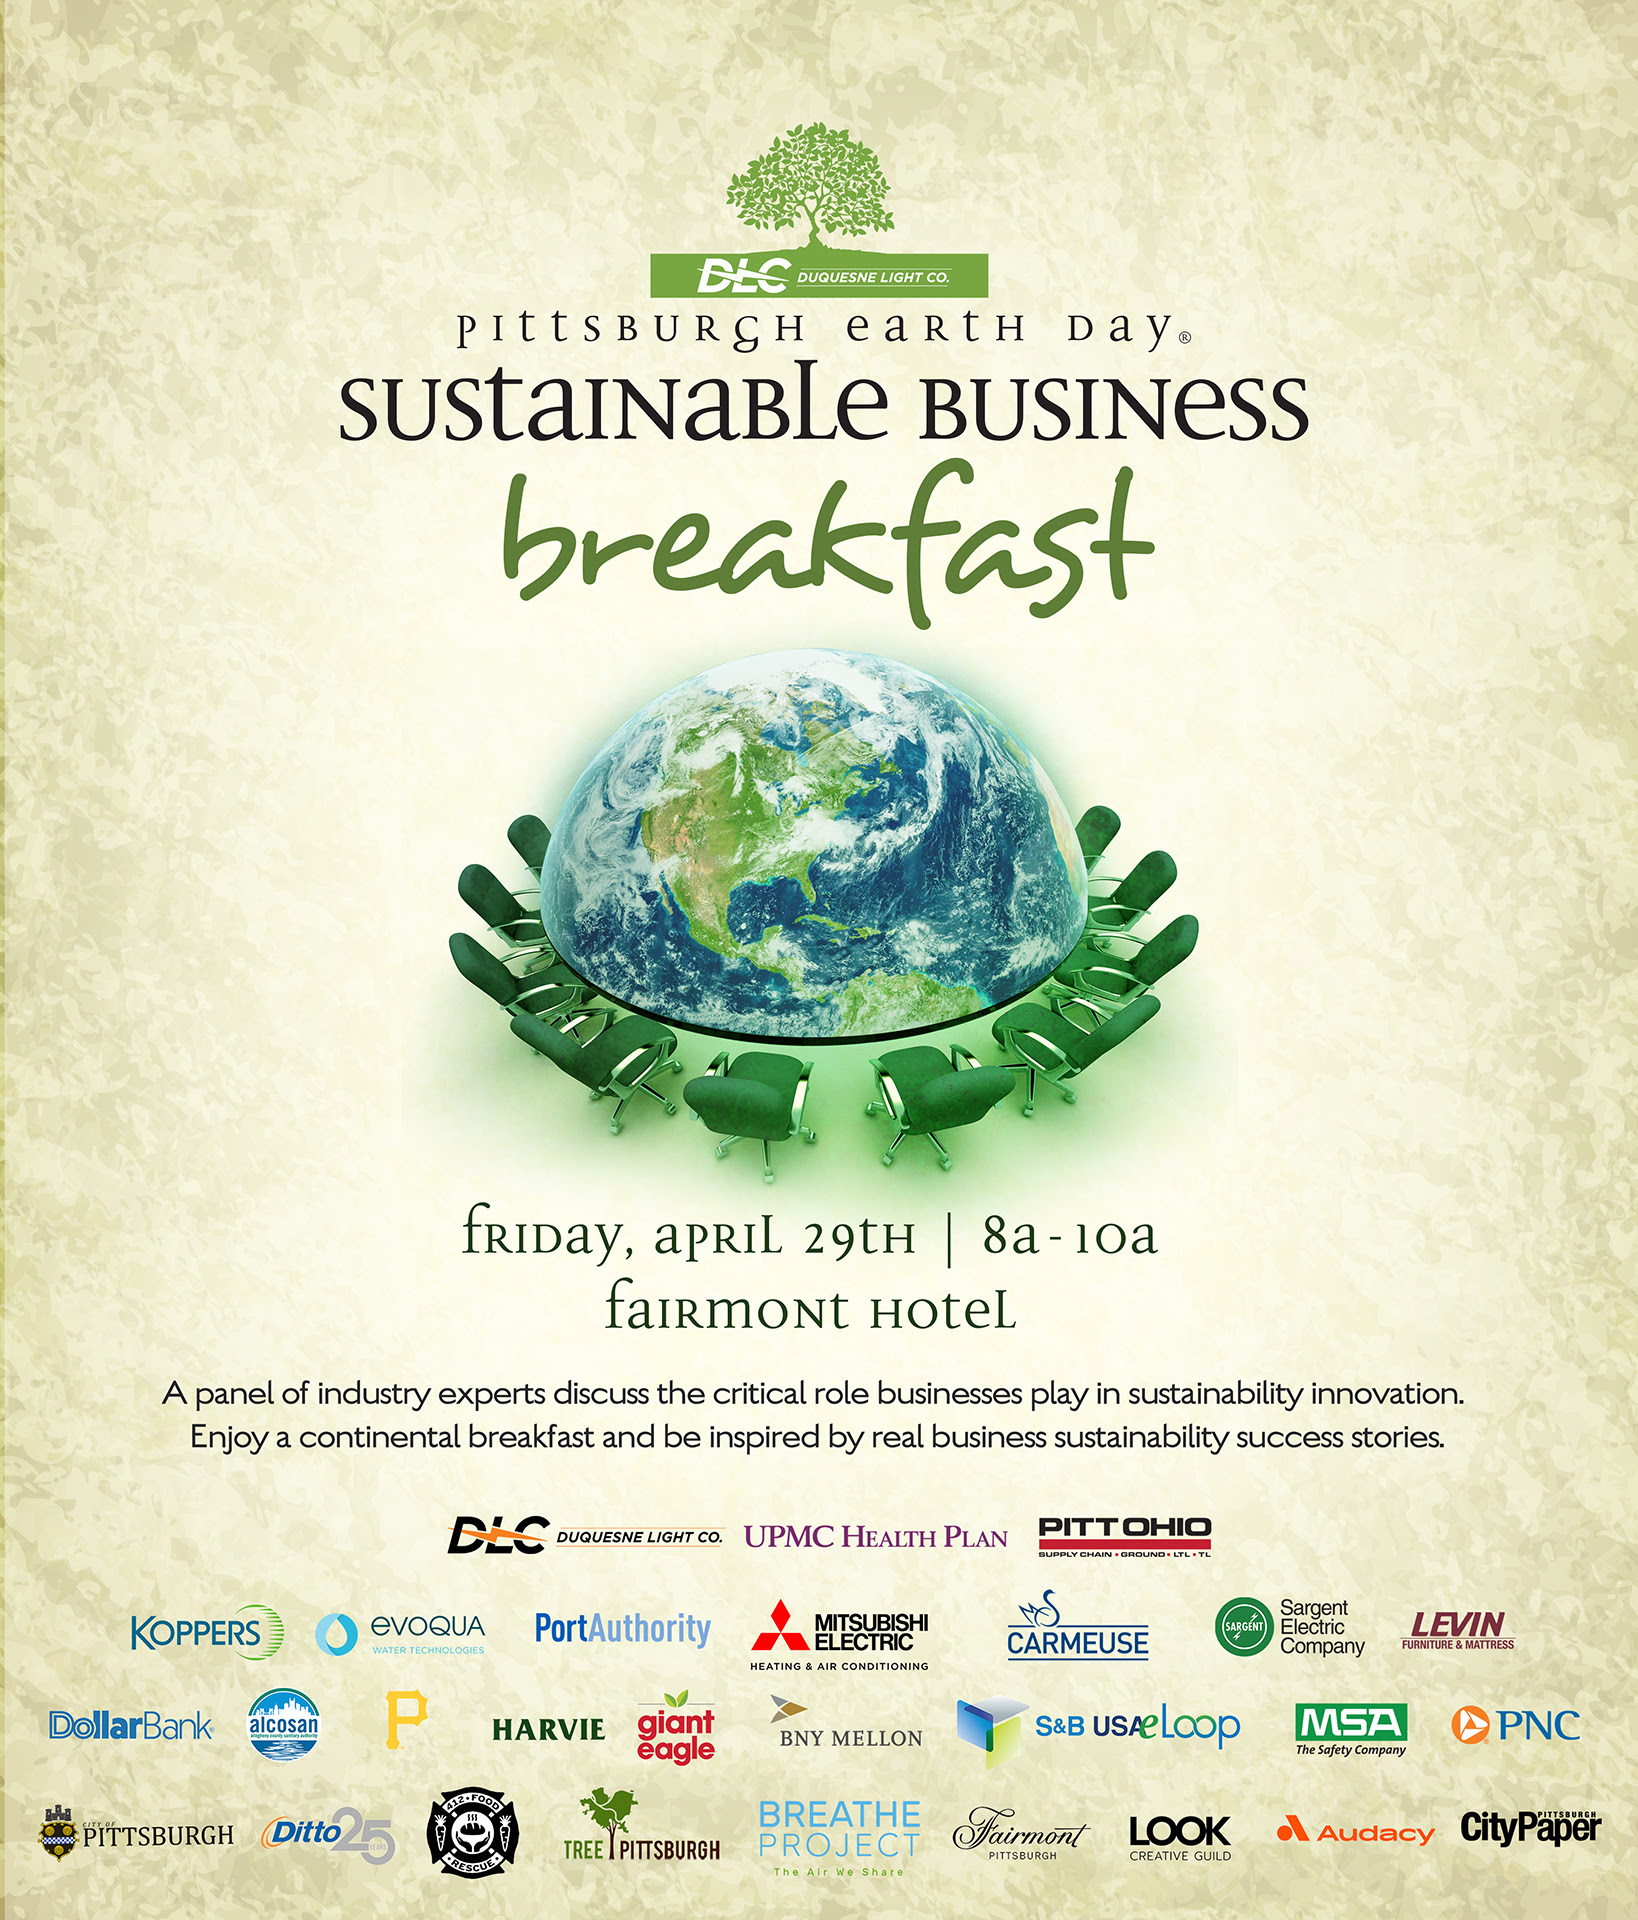 Pittsburgh Earth Day Sustainable Business Breakfast at The Fairmont Pittsburgh